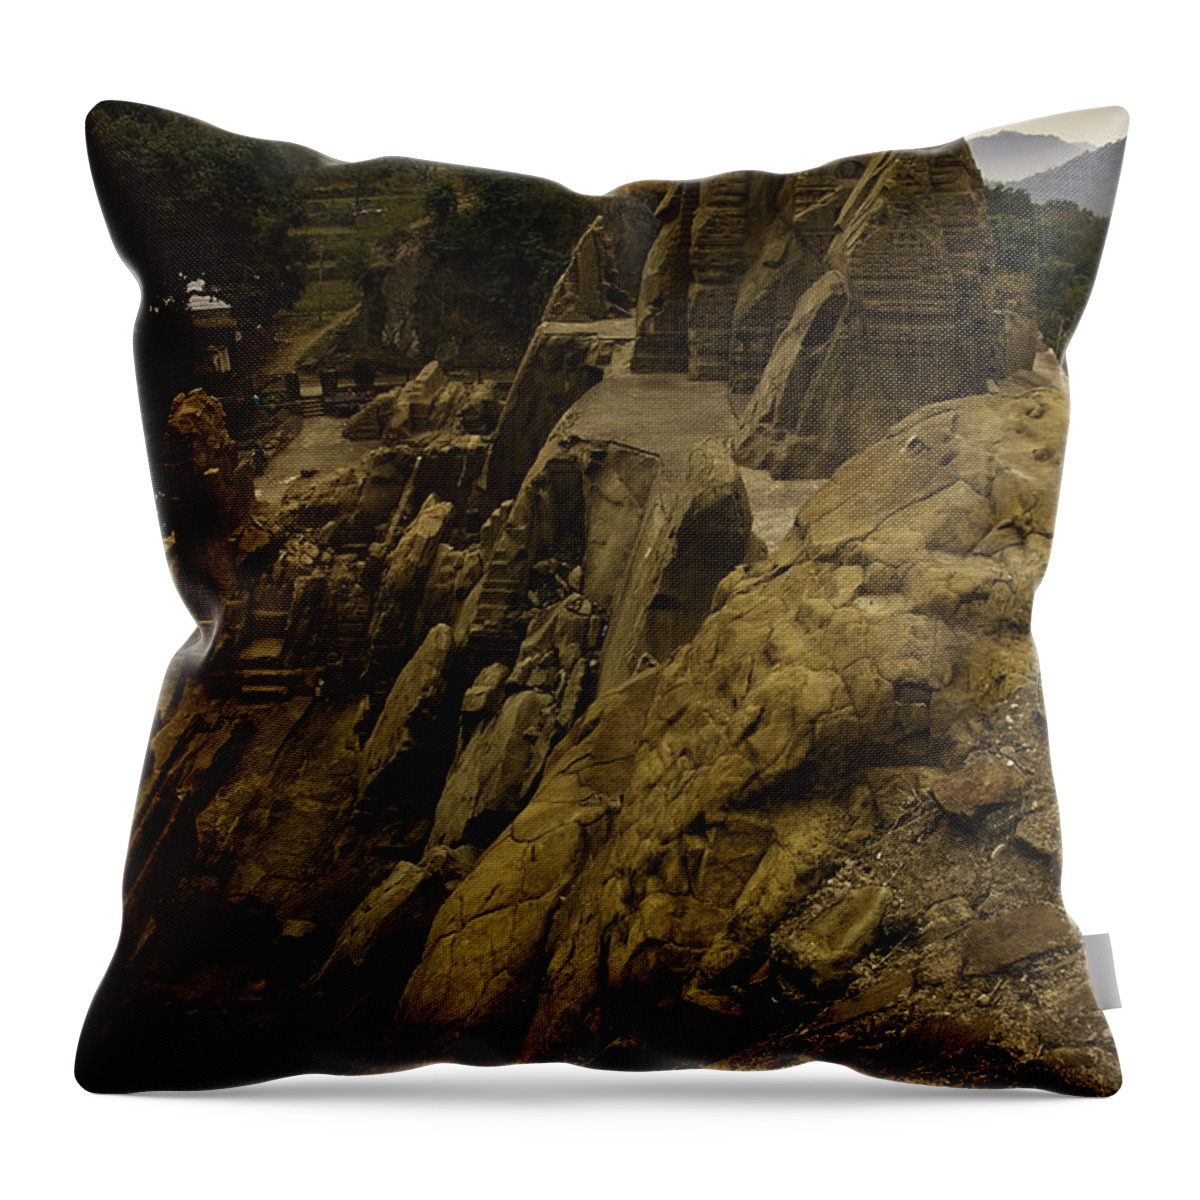 Masroor Throw Pillow featuring the photograph Masroor Temple by Rajiv Chopra